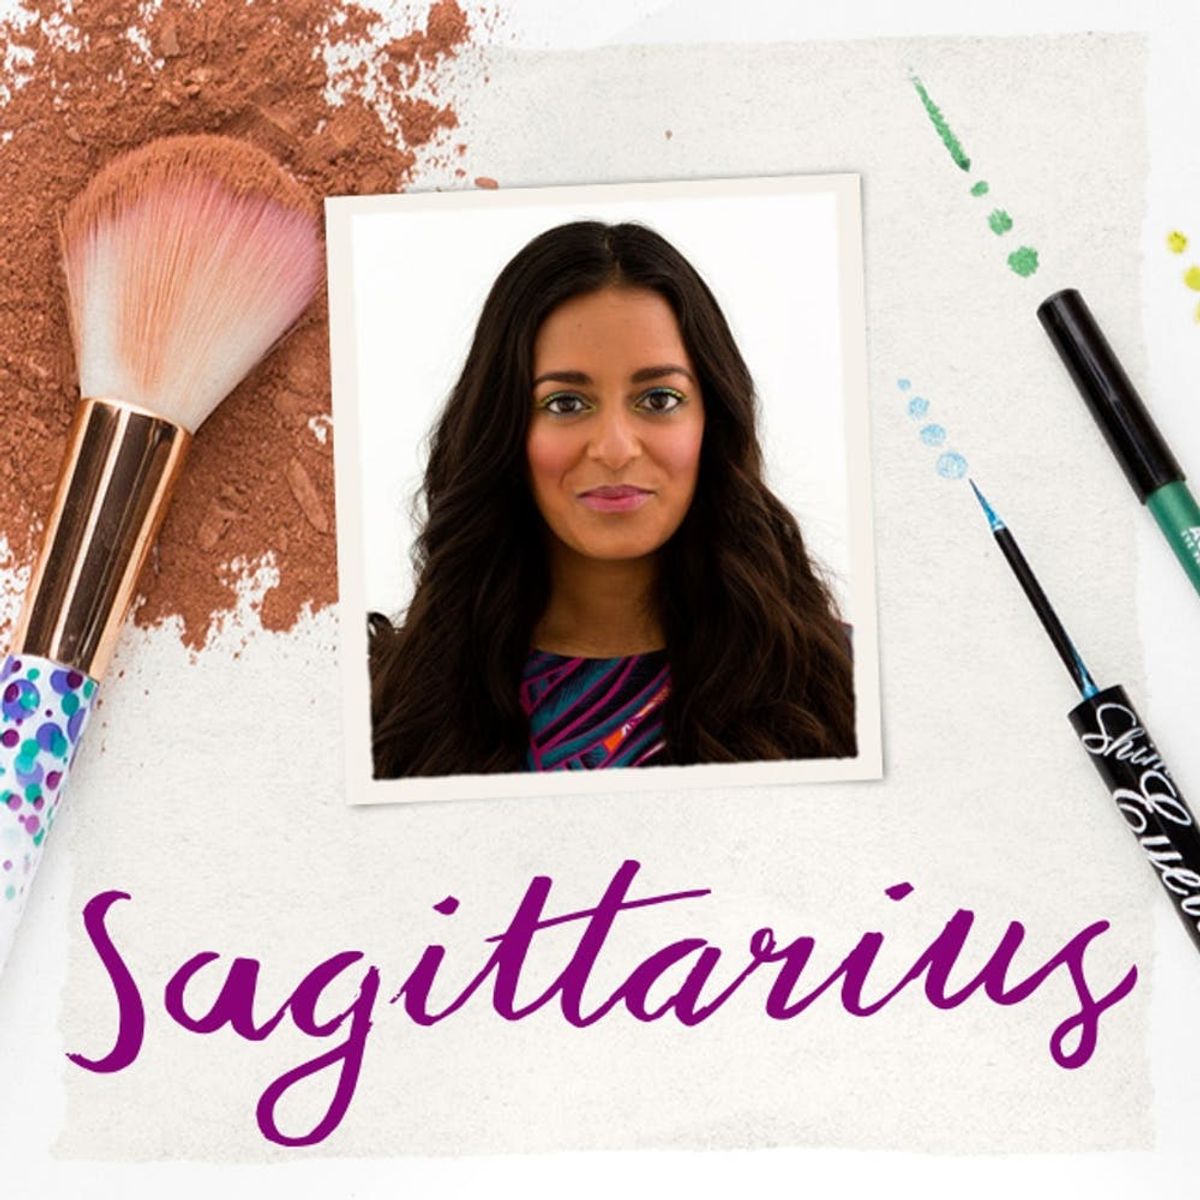 The Best Makeup for Your Zodiac Sign: Sagittarius Edition